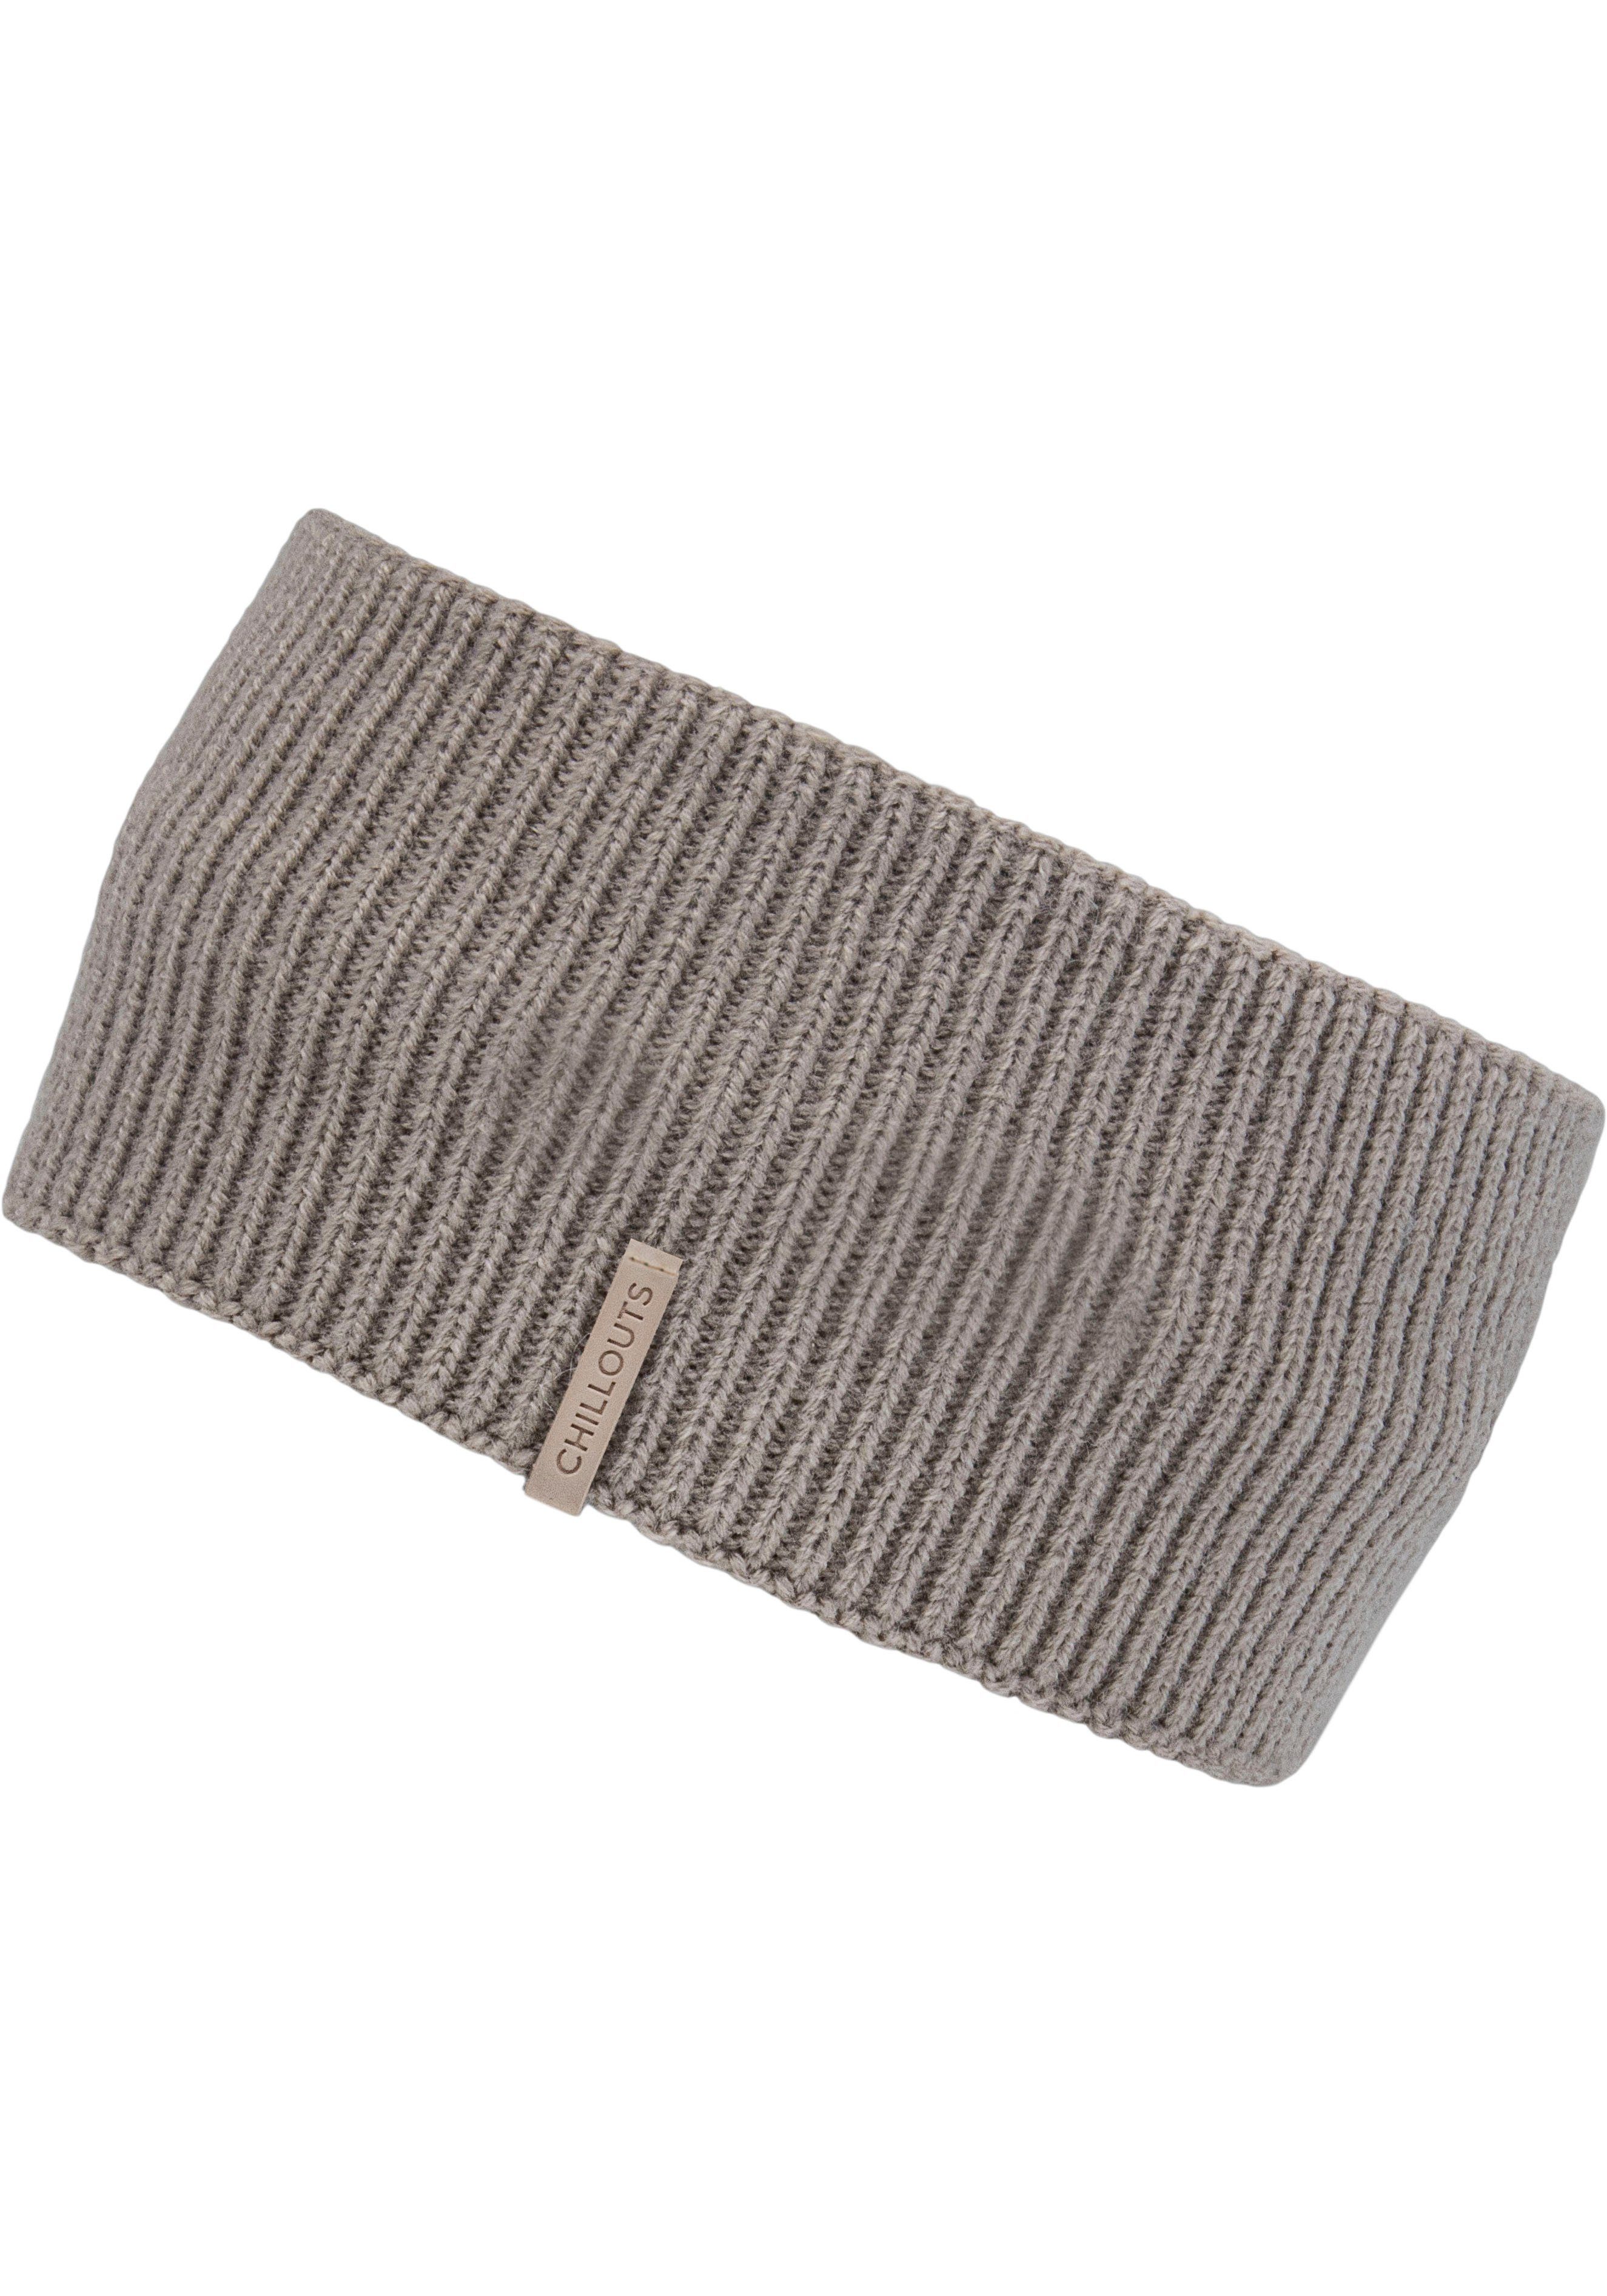 chillouts Stirnband Ida Headband Accessoire taupe Trendiges